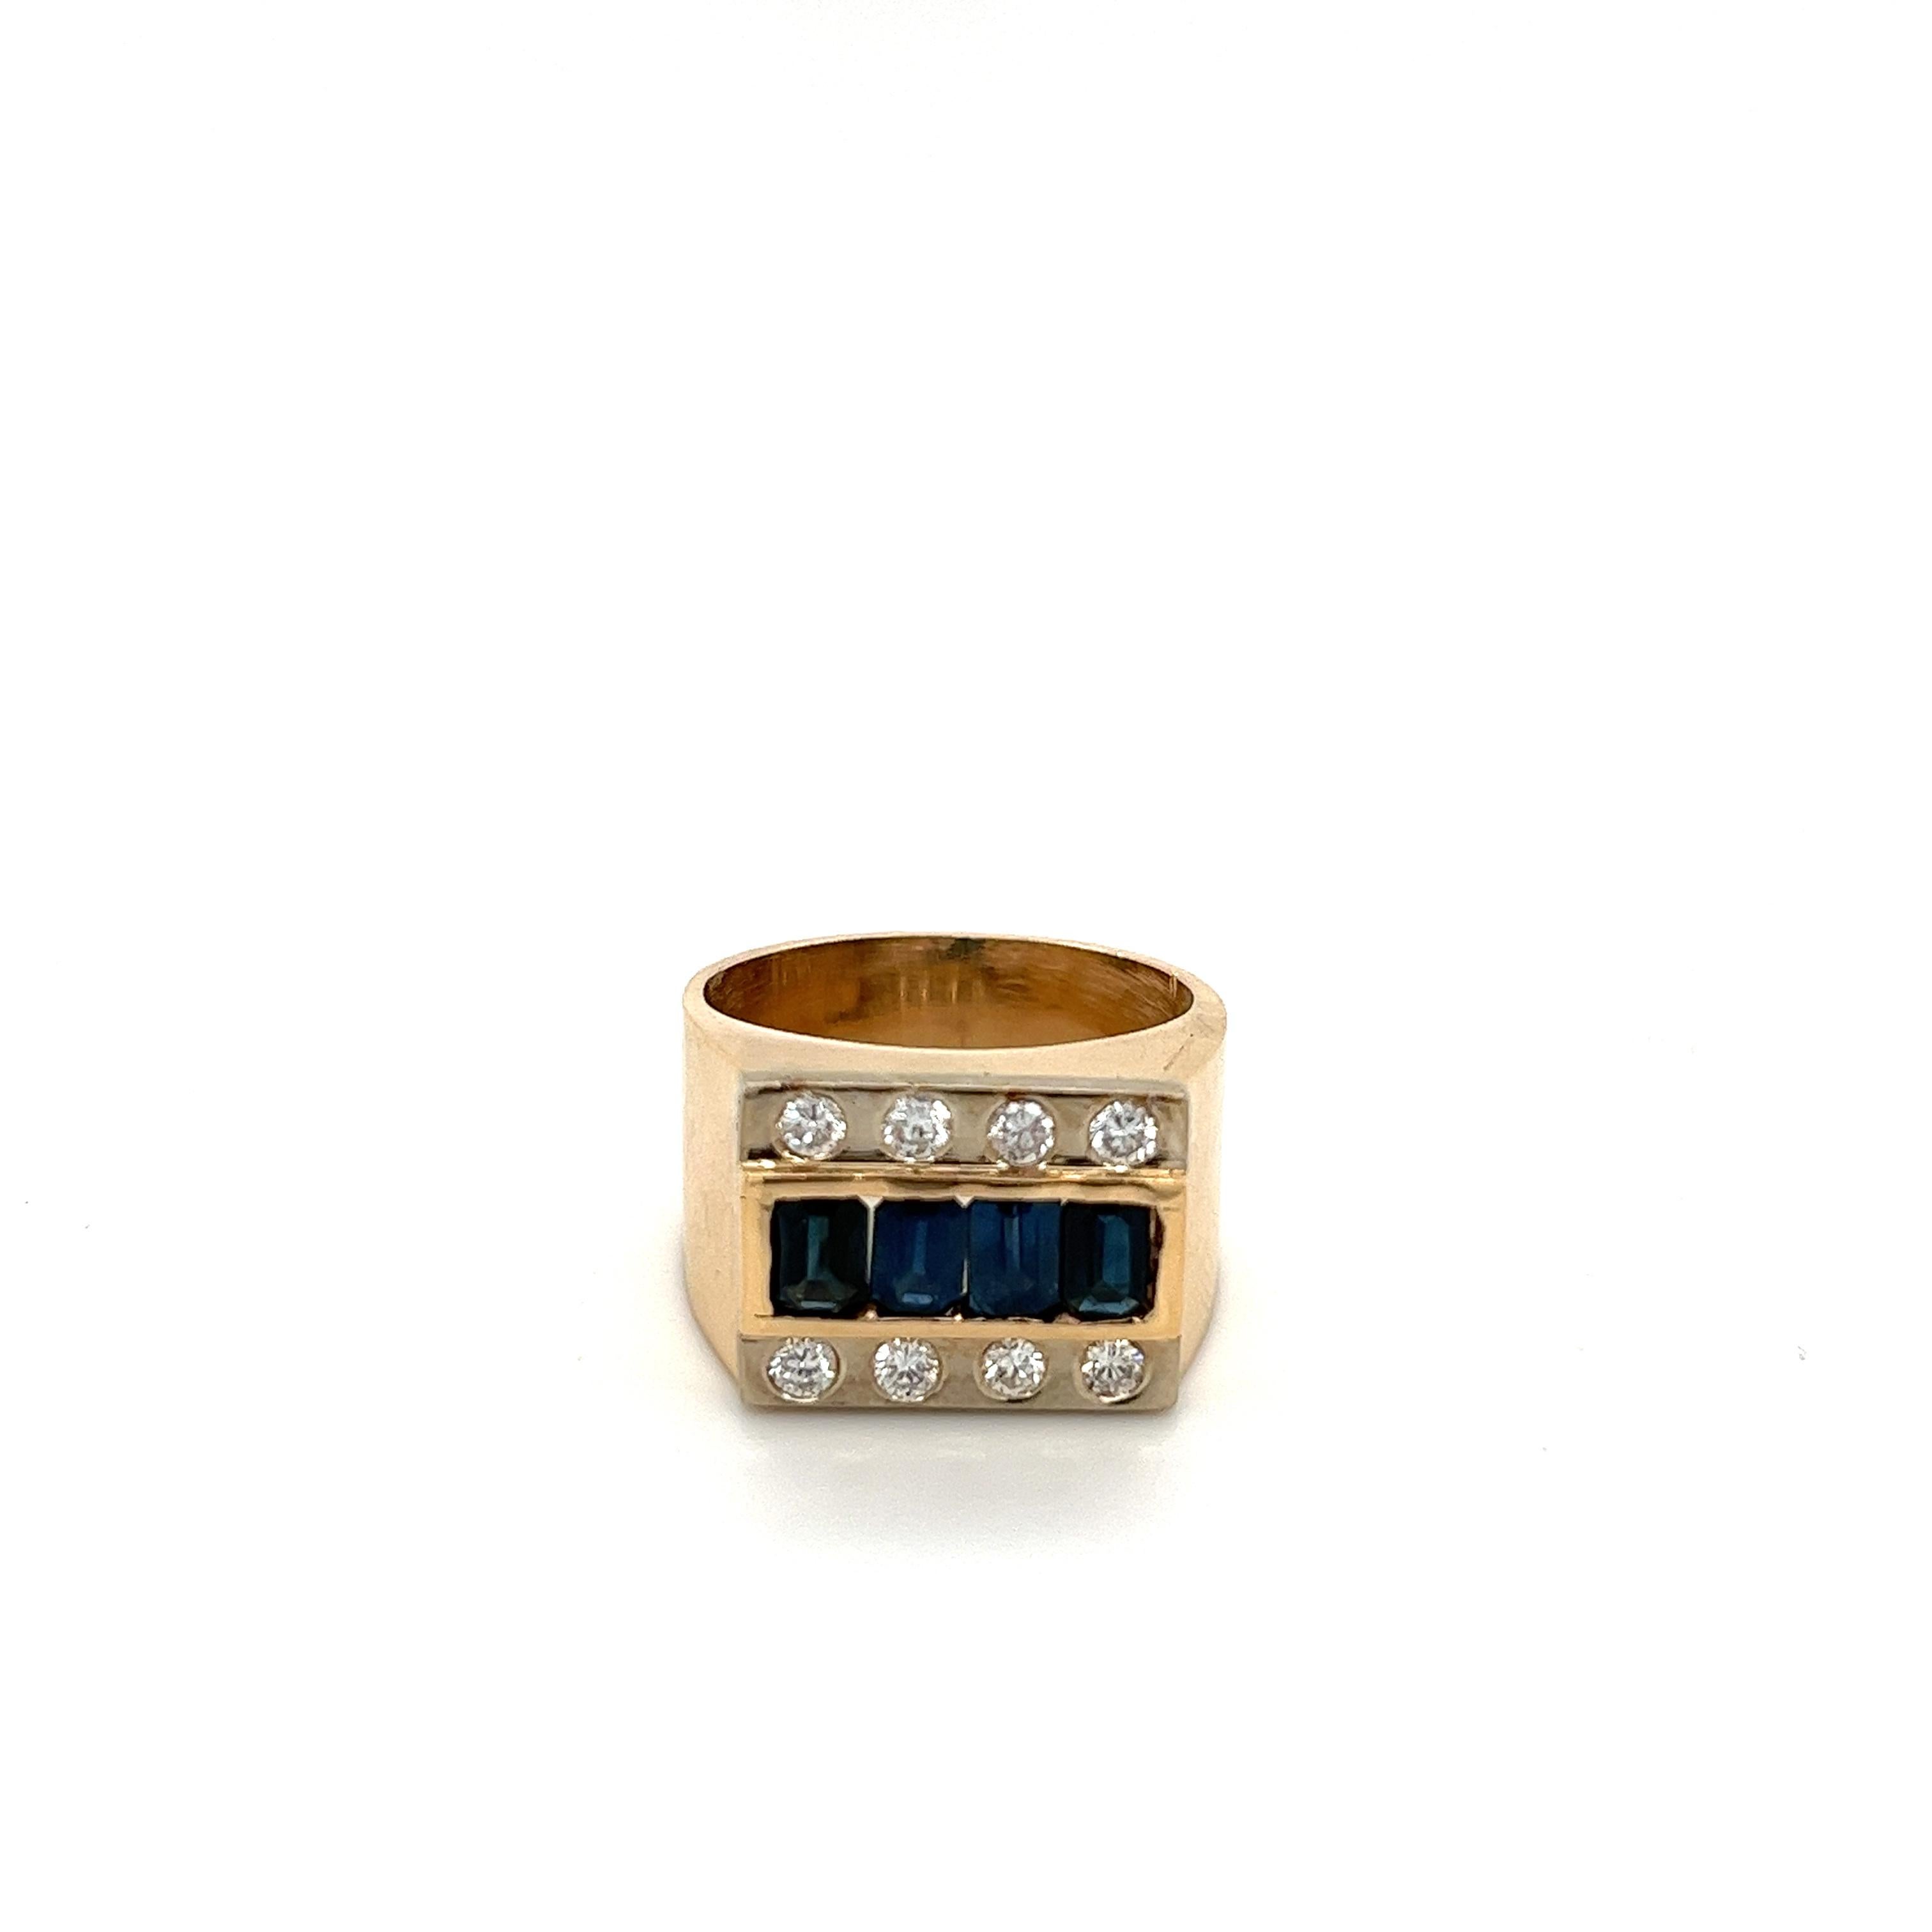 Natural Diamond and Blue Sapphire checkerboard style wide band ring. The gemstones are bezel-set stones in a classic men's pinky ring symmetrical pattern. 14k solid gold with a shiny polished finish. 

This ring can be polished upon request. Free of